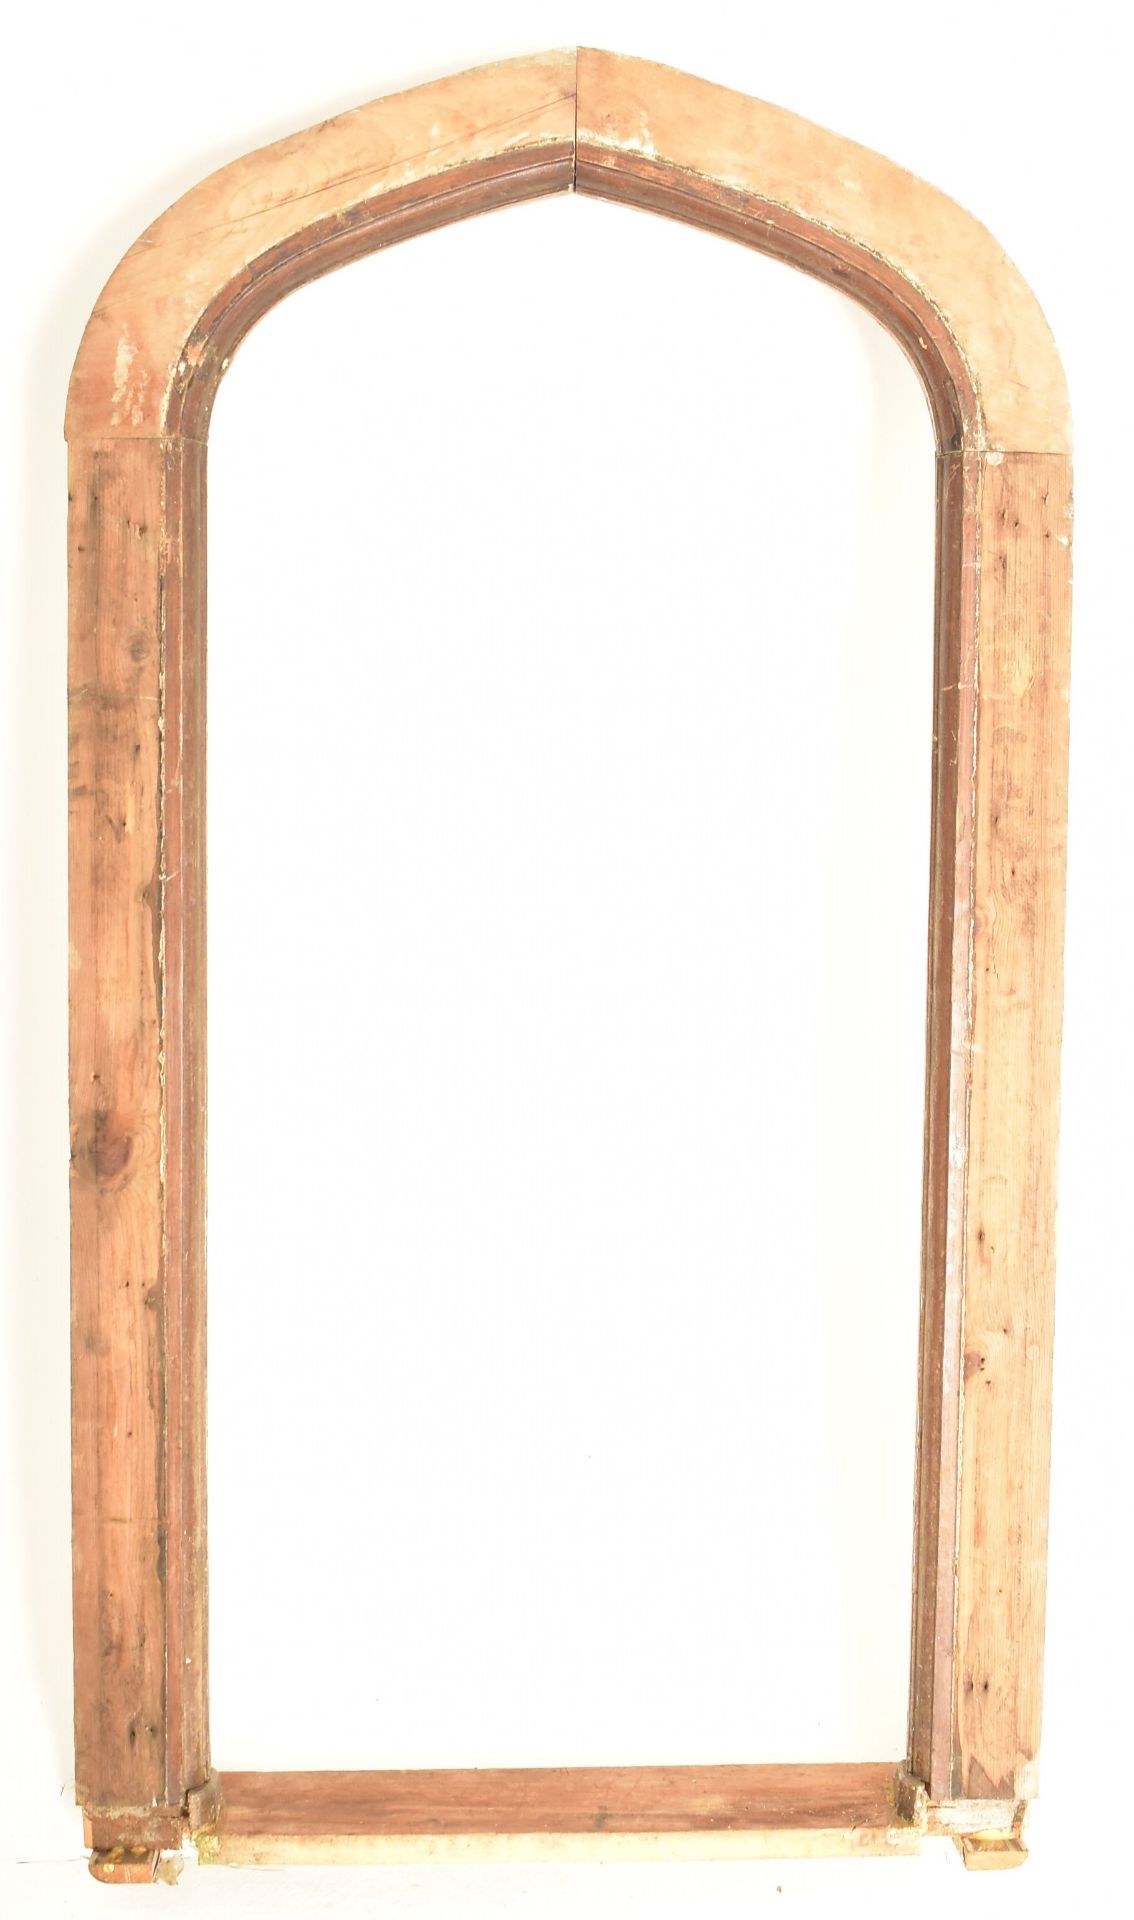 VICTORIAN CARVED WOOD GOTHIC STYLE WINDOW FRAME - Image 5 of 6